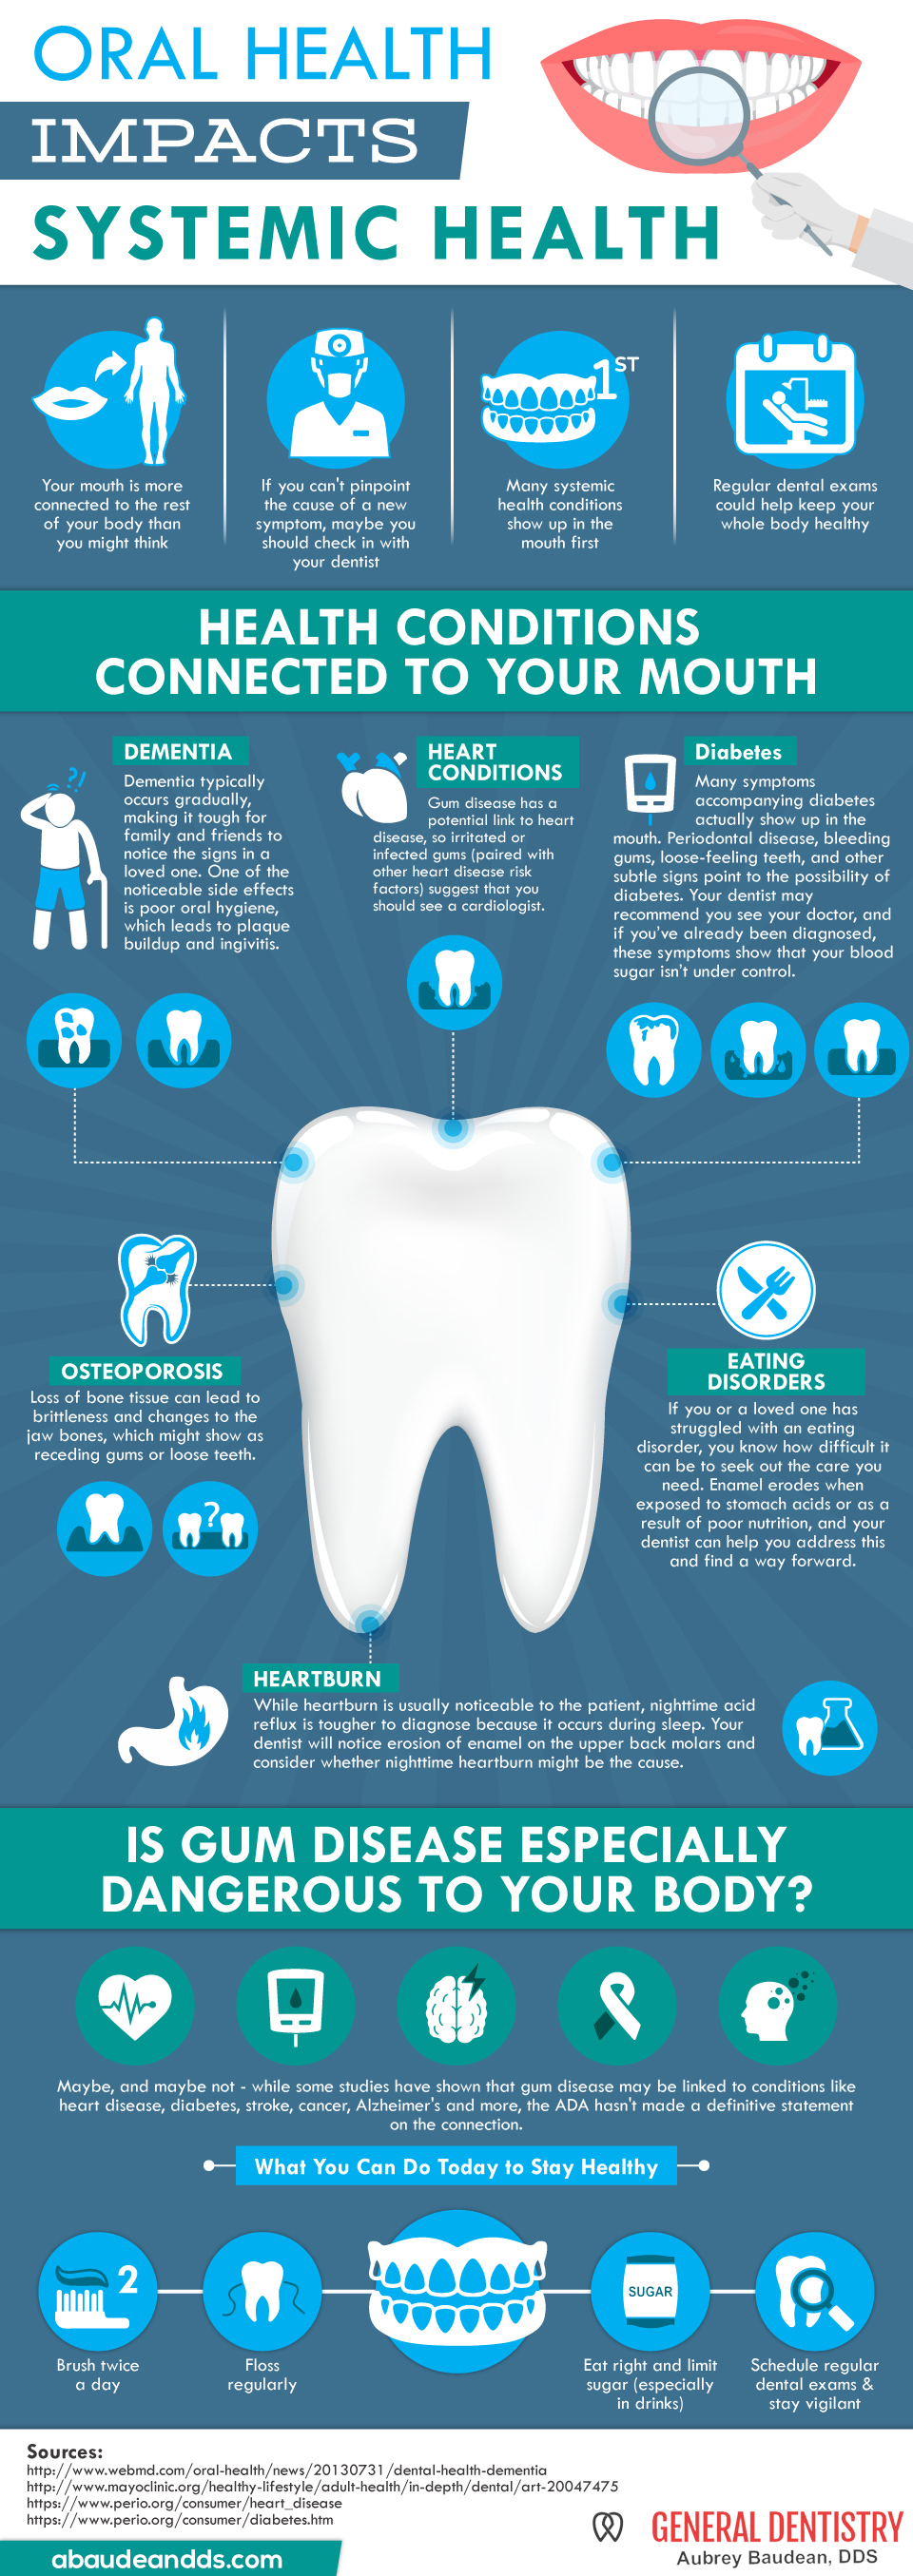 infographic about how oral health impacts systemic health